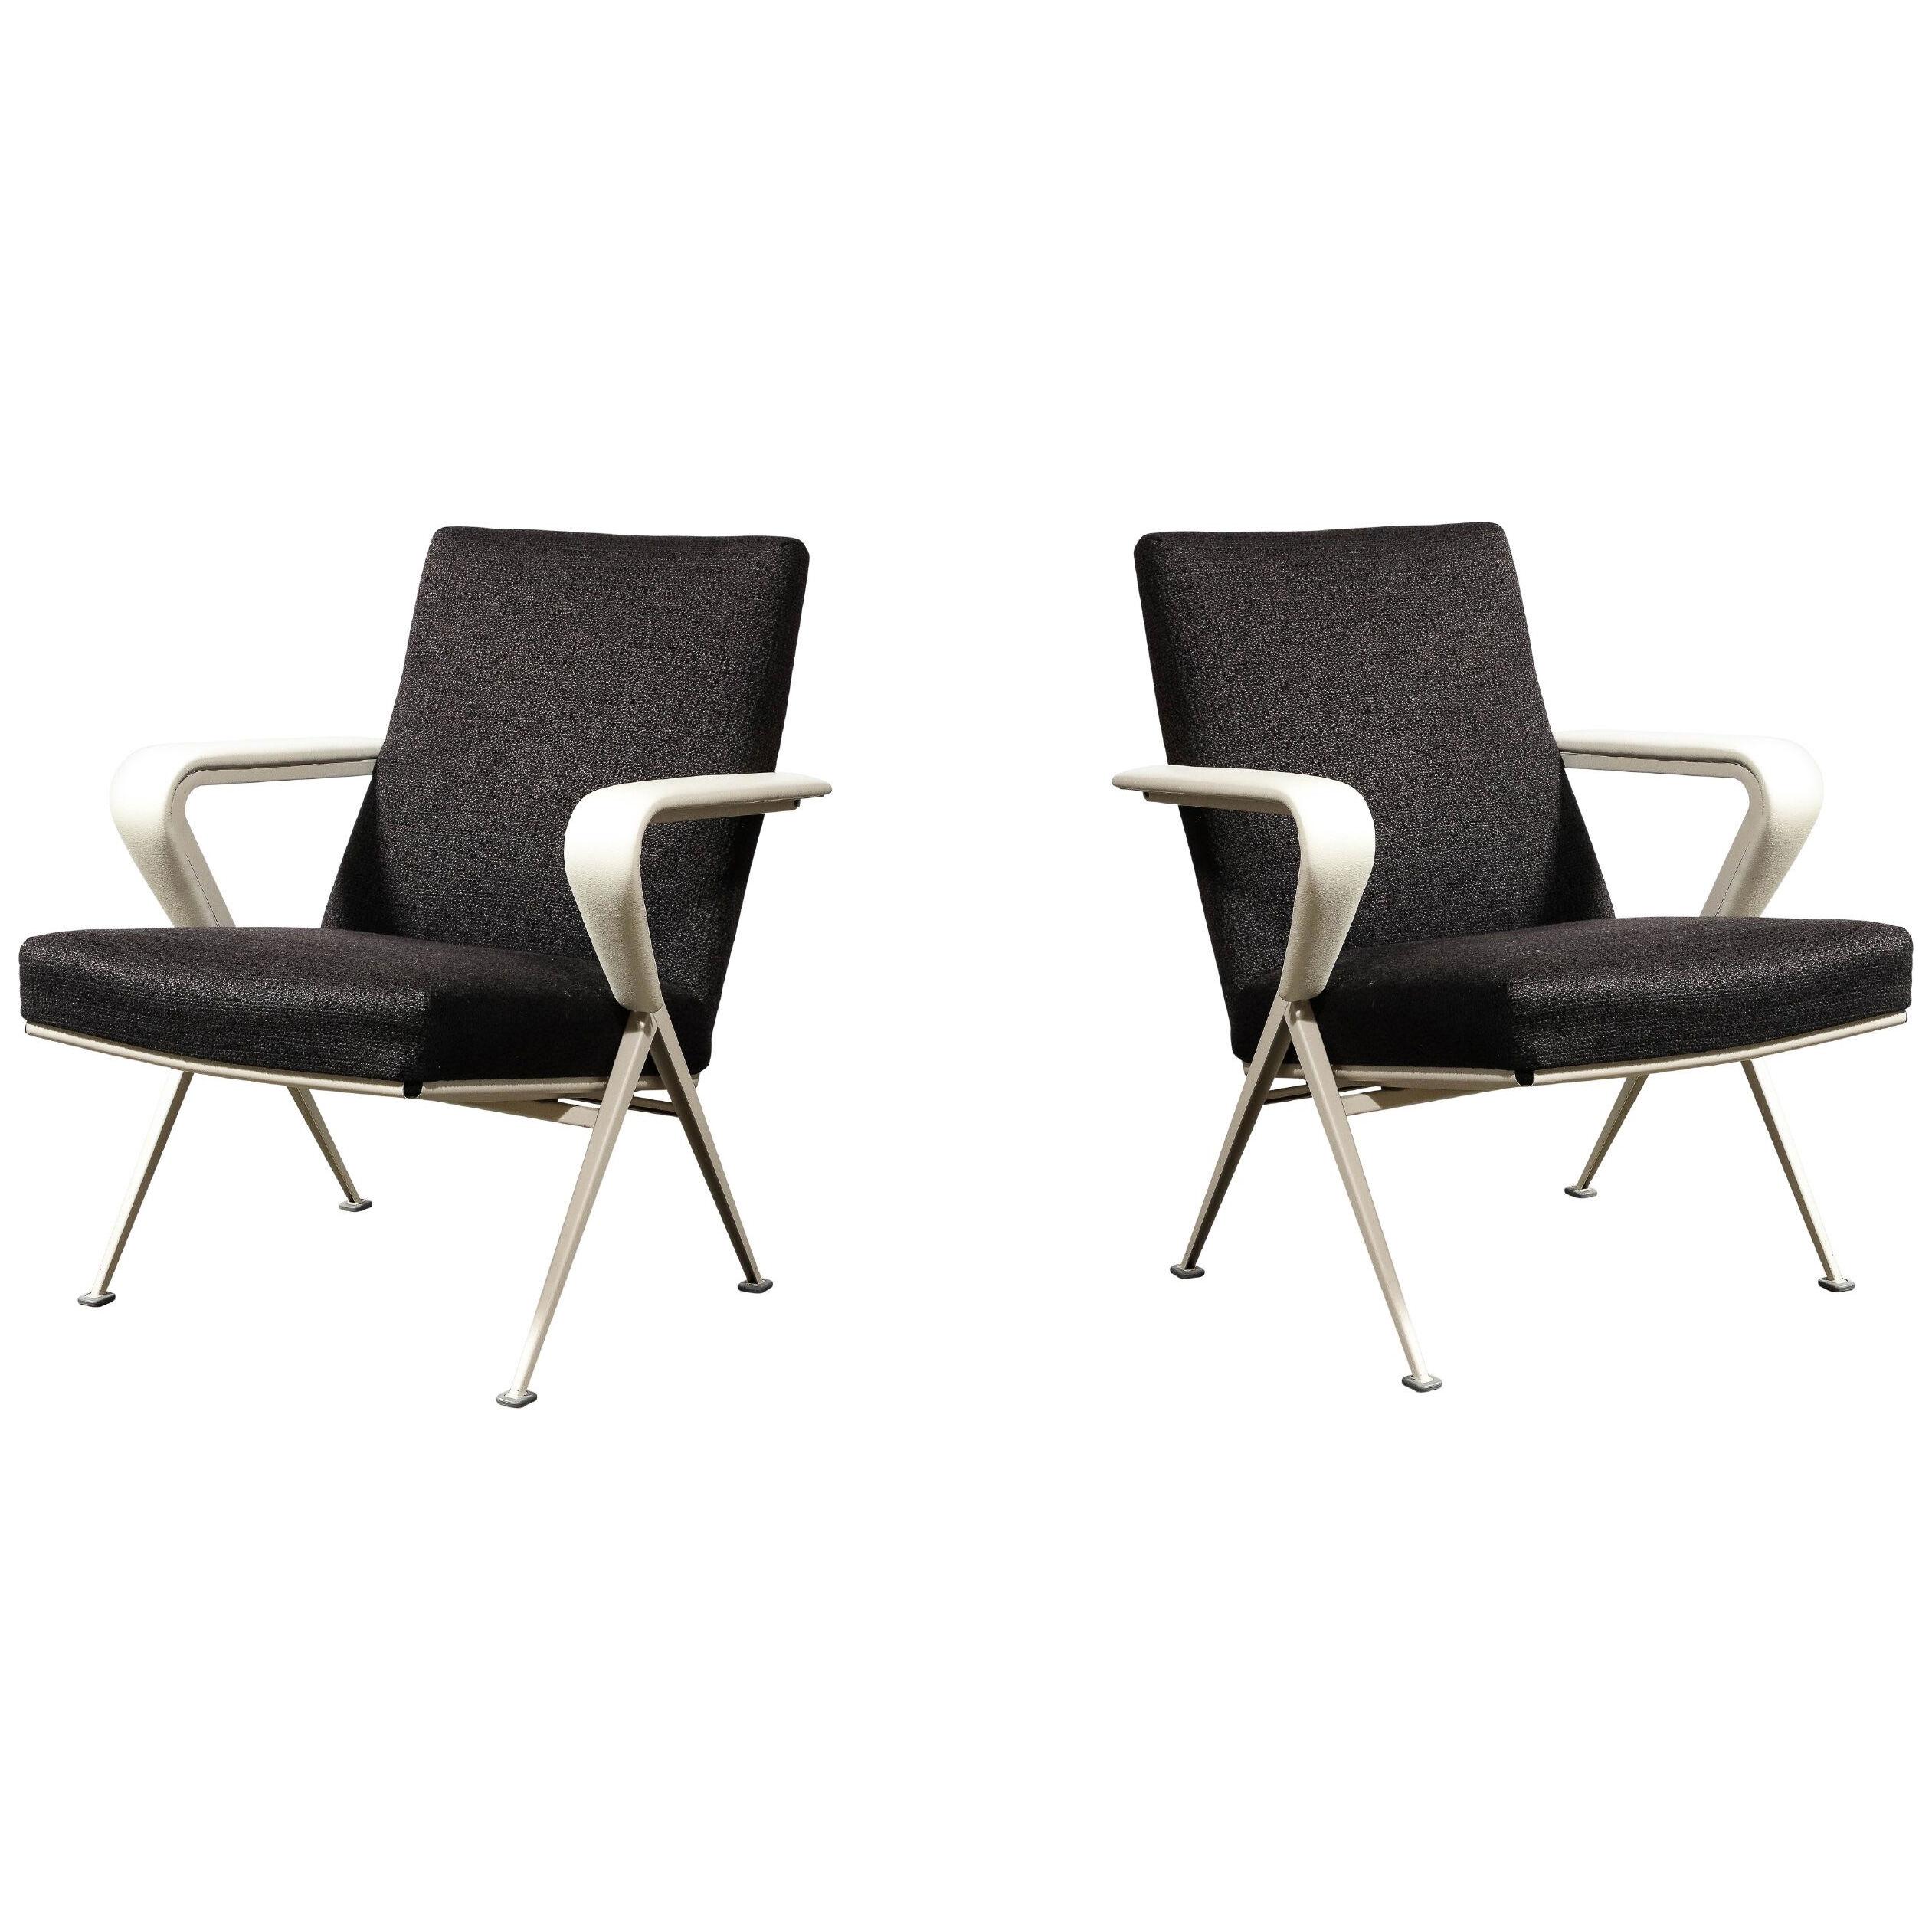 Pair of Repose Chairs in White Leather, Enameled Steel & Charcoal Upholstery